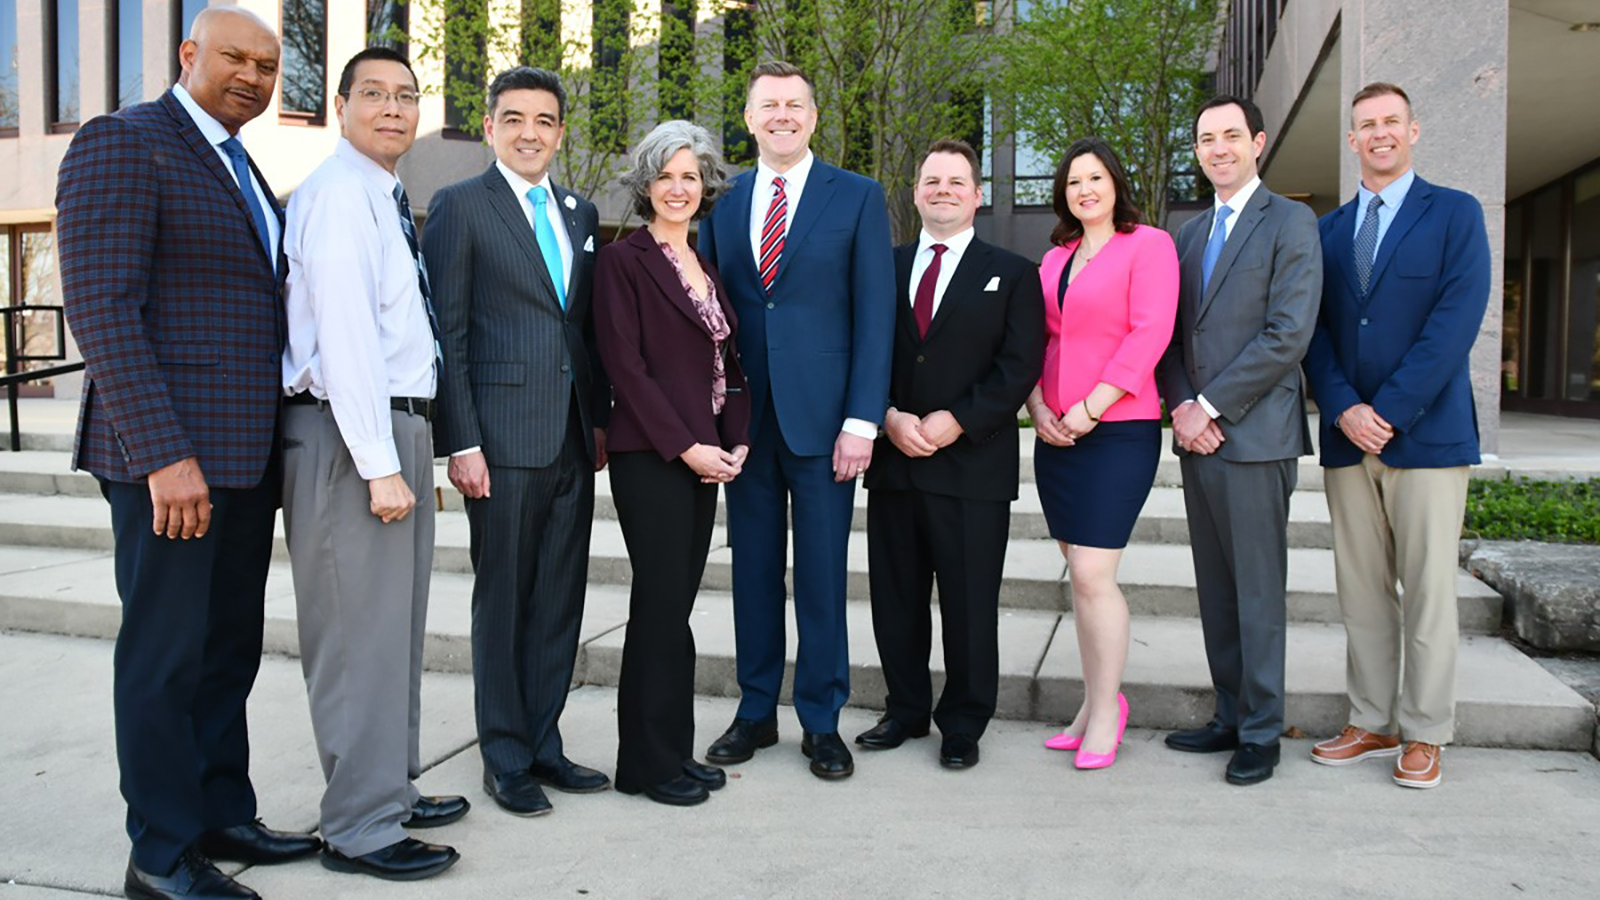 Meet your City Council The City of Naperville